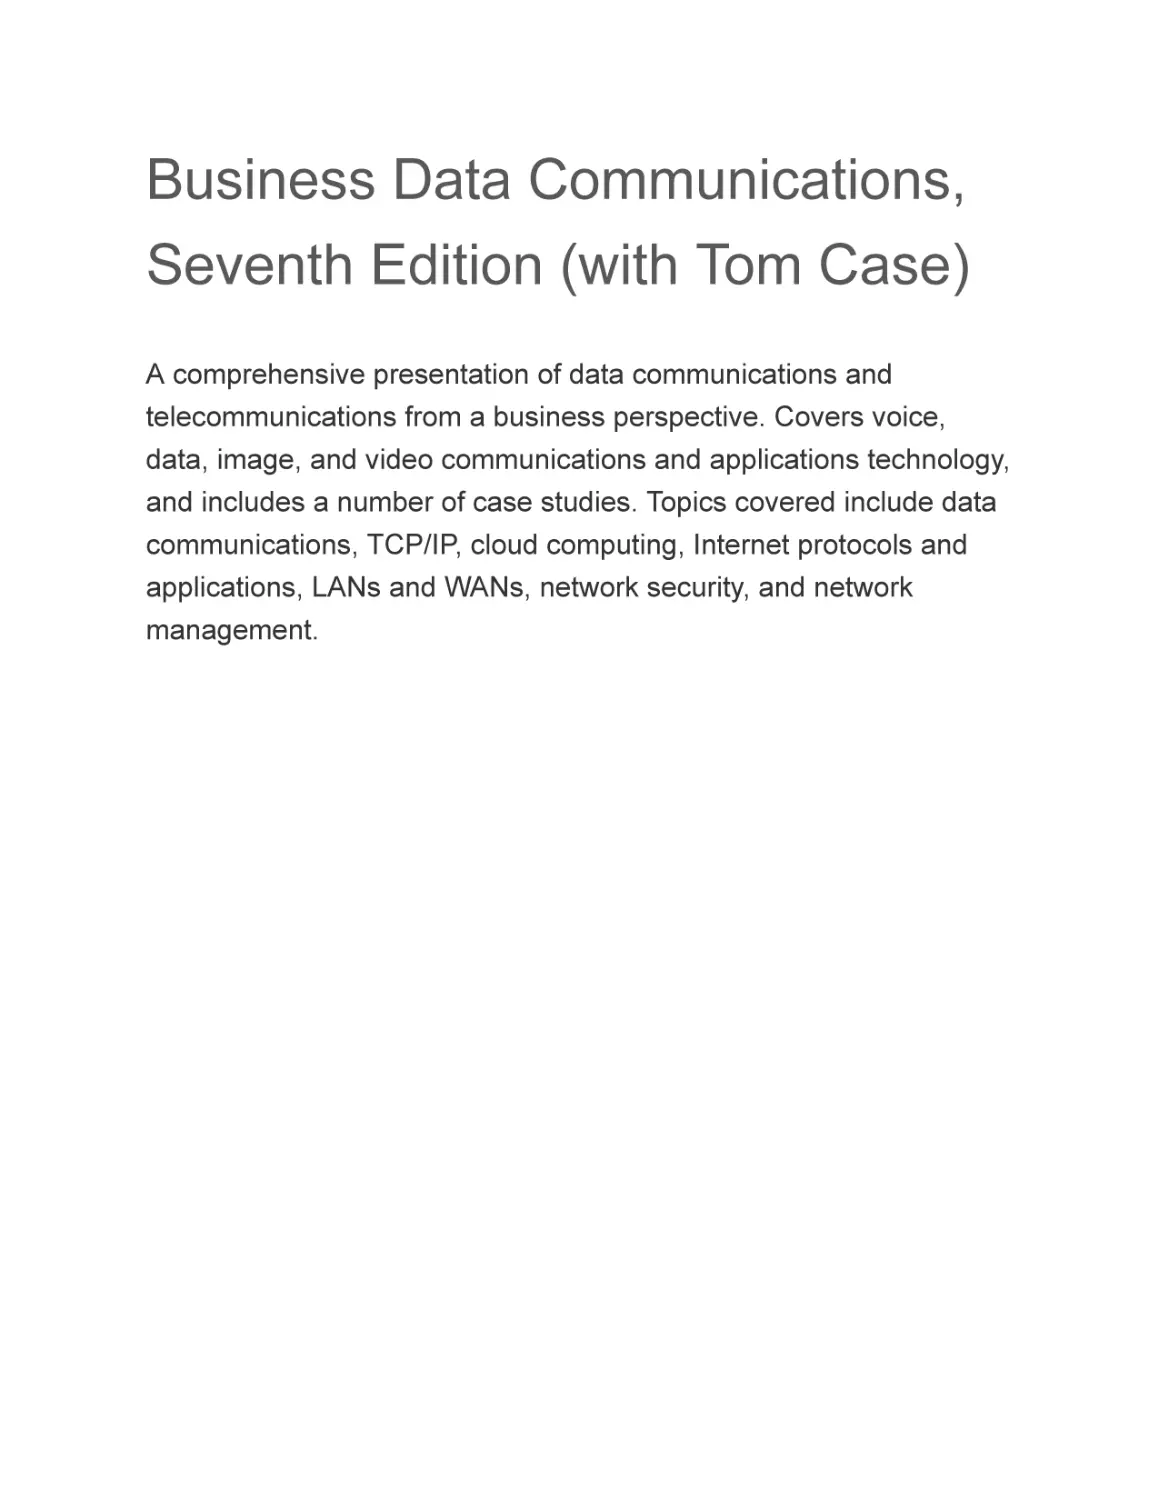 Business Data Communications, Seventh Edition (with Tom Case)